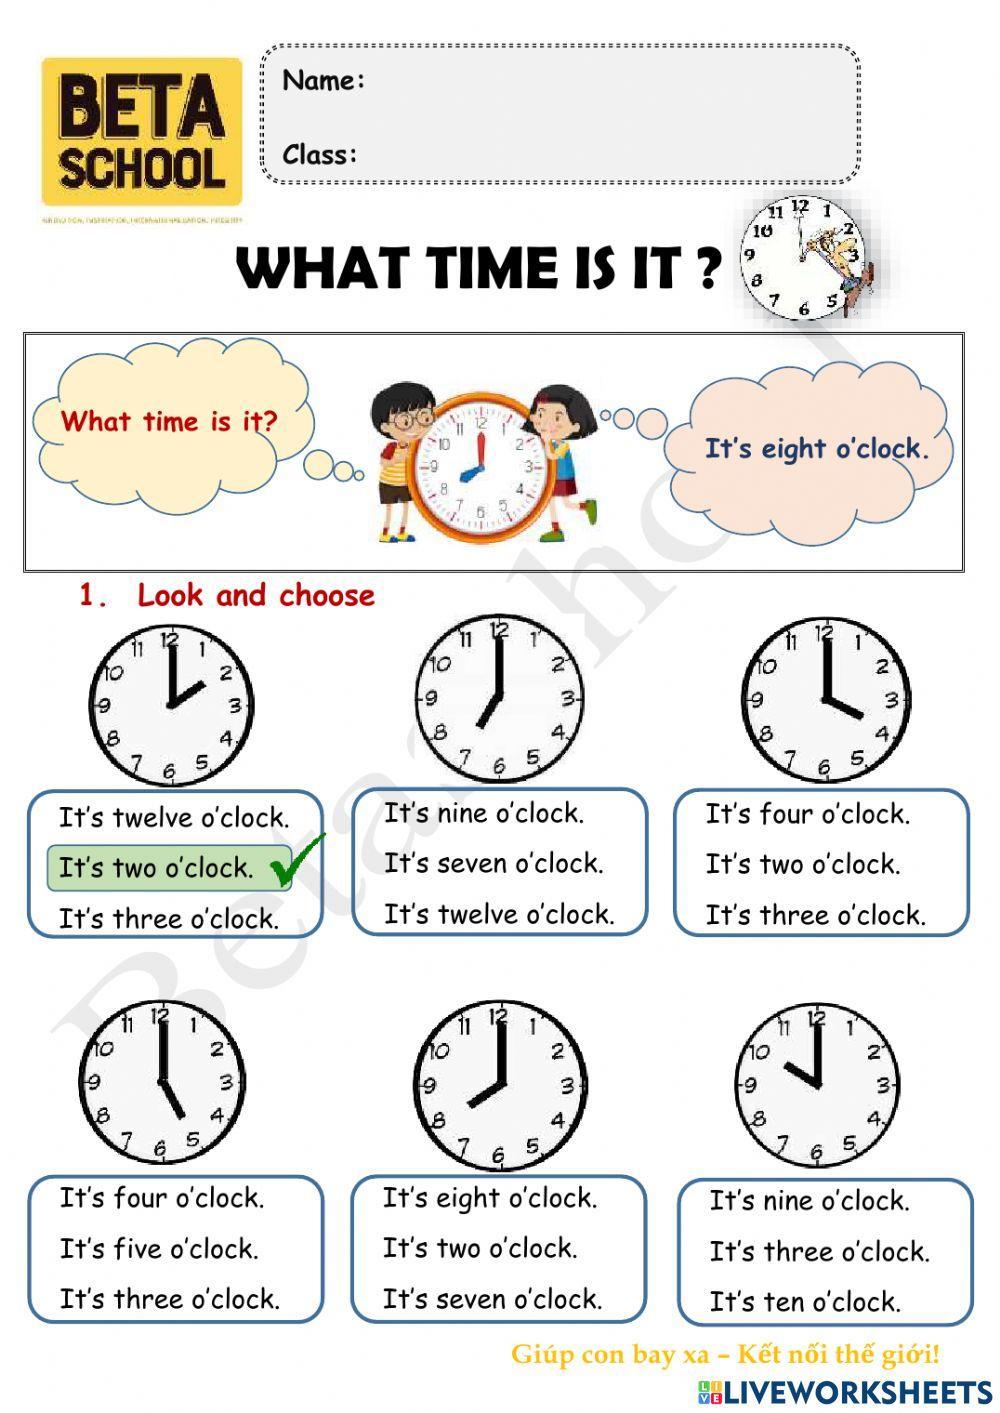 BE1A - What time is it? - TOPIC 5